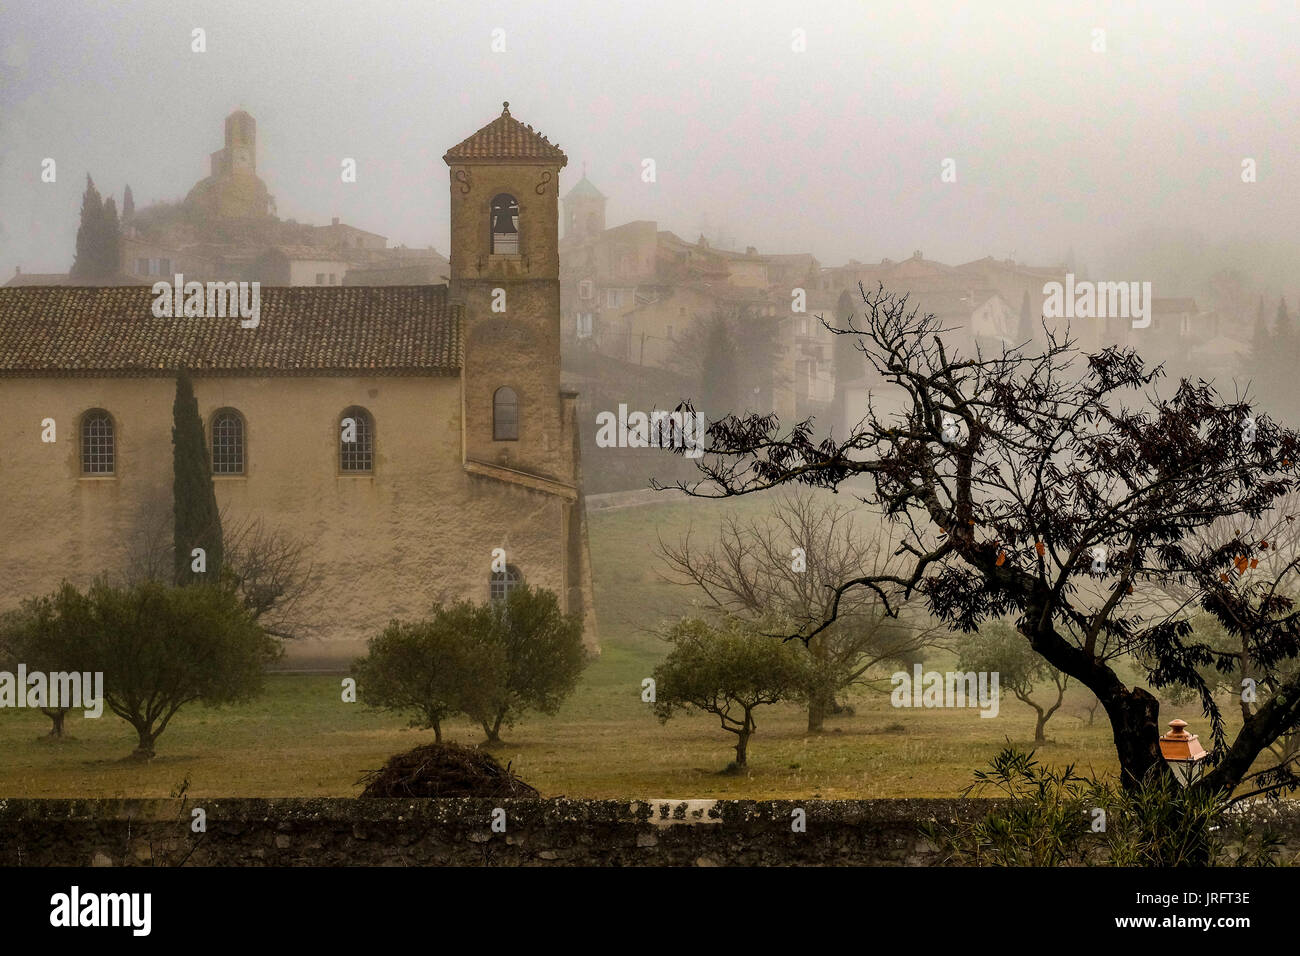 A foggy winter's day in the churchyard of the Provencal town of Lourmarin in the Luberon region of southern France with the village in the background. Stock Photo